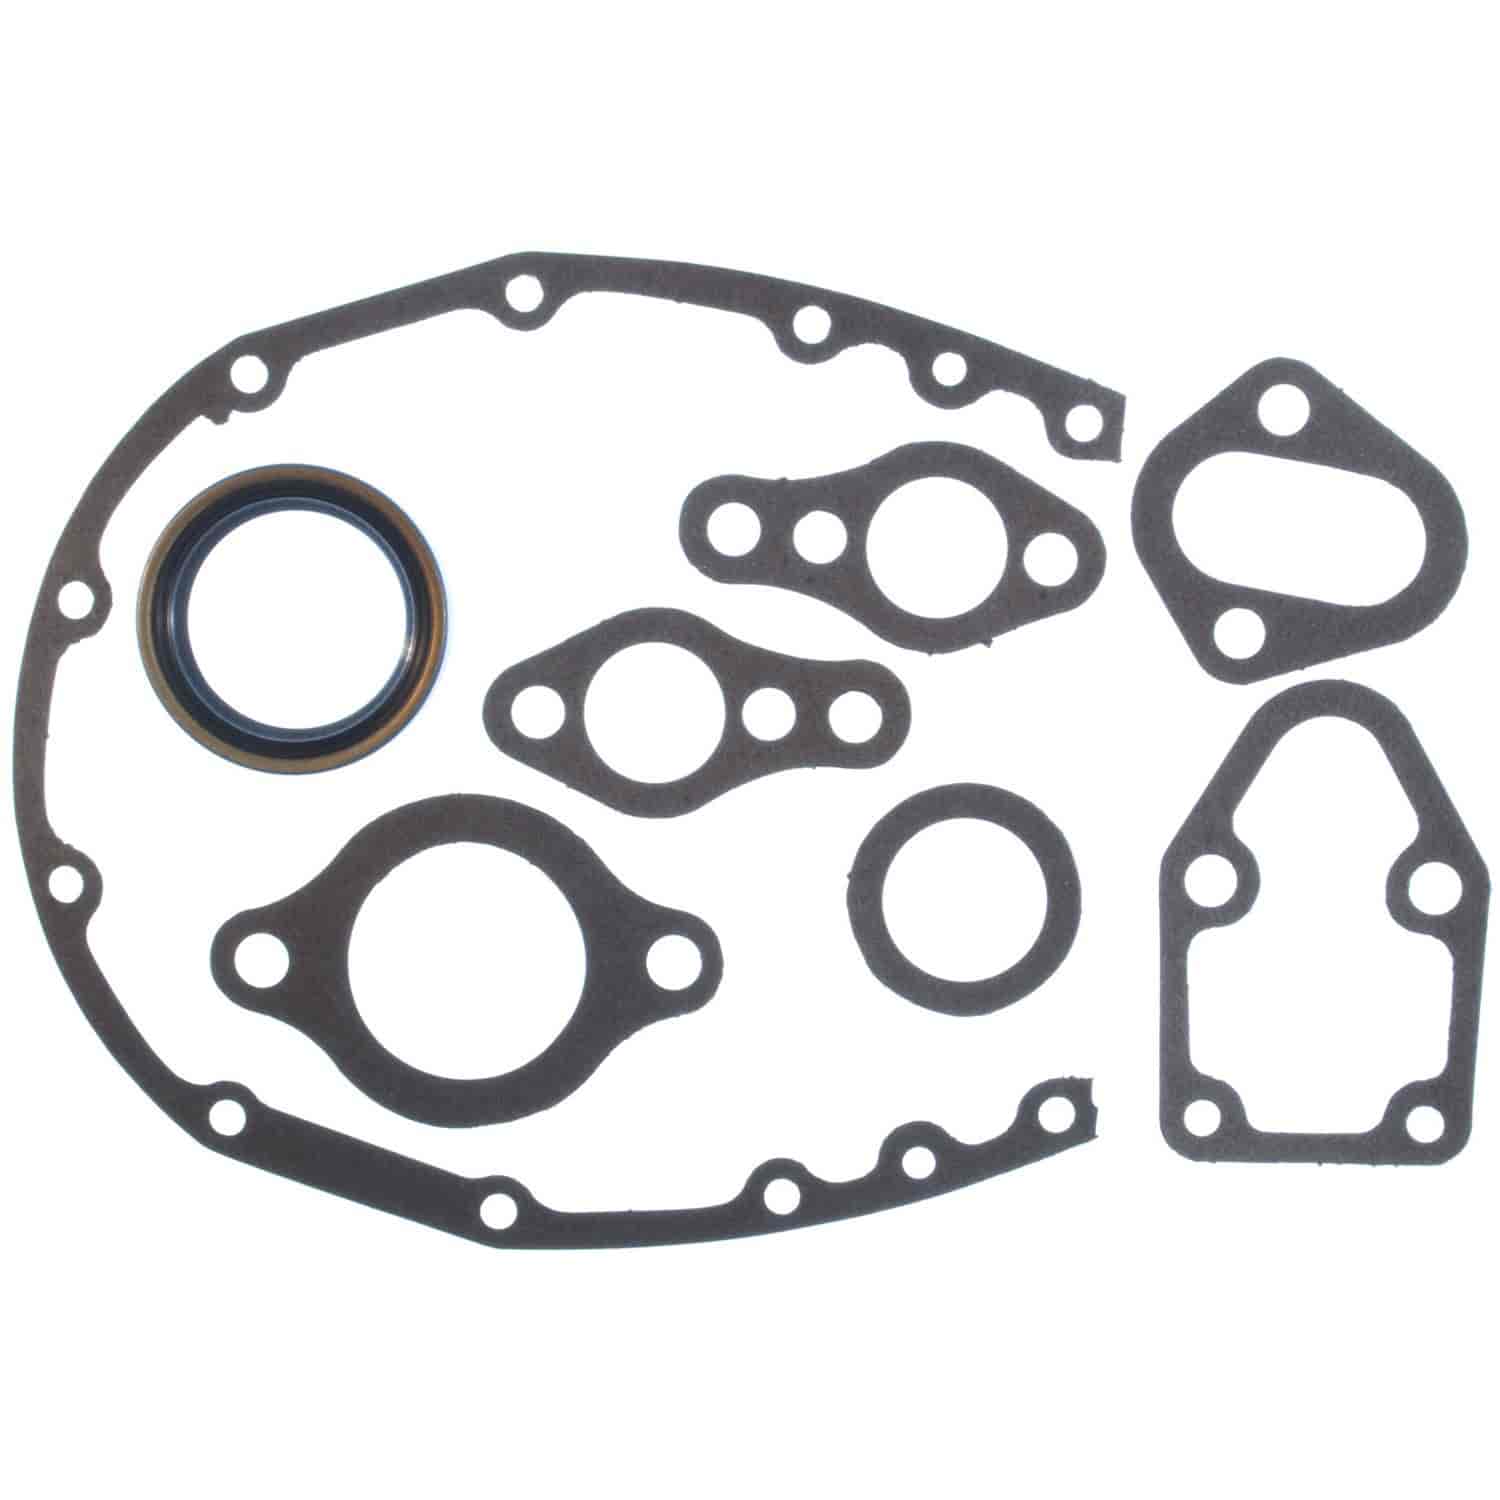 Timing Cover Gasket Set 1986-1995 Small Block Chevy 305/350 (5.0/5.7L)